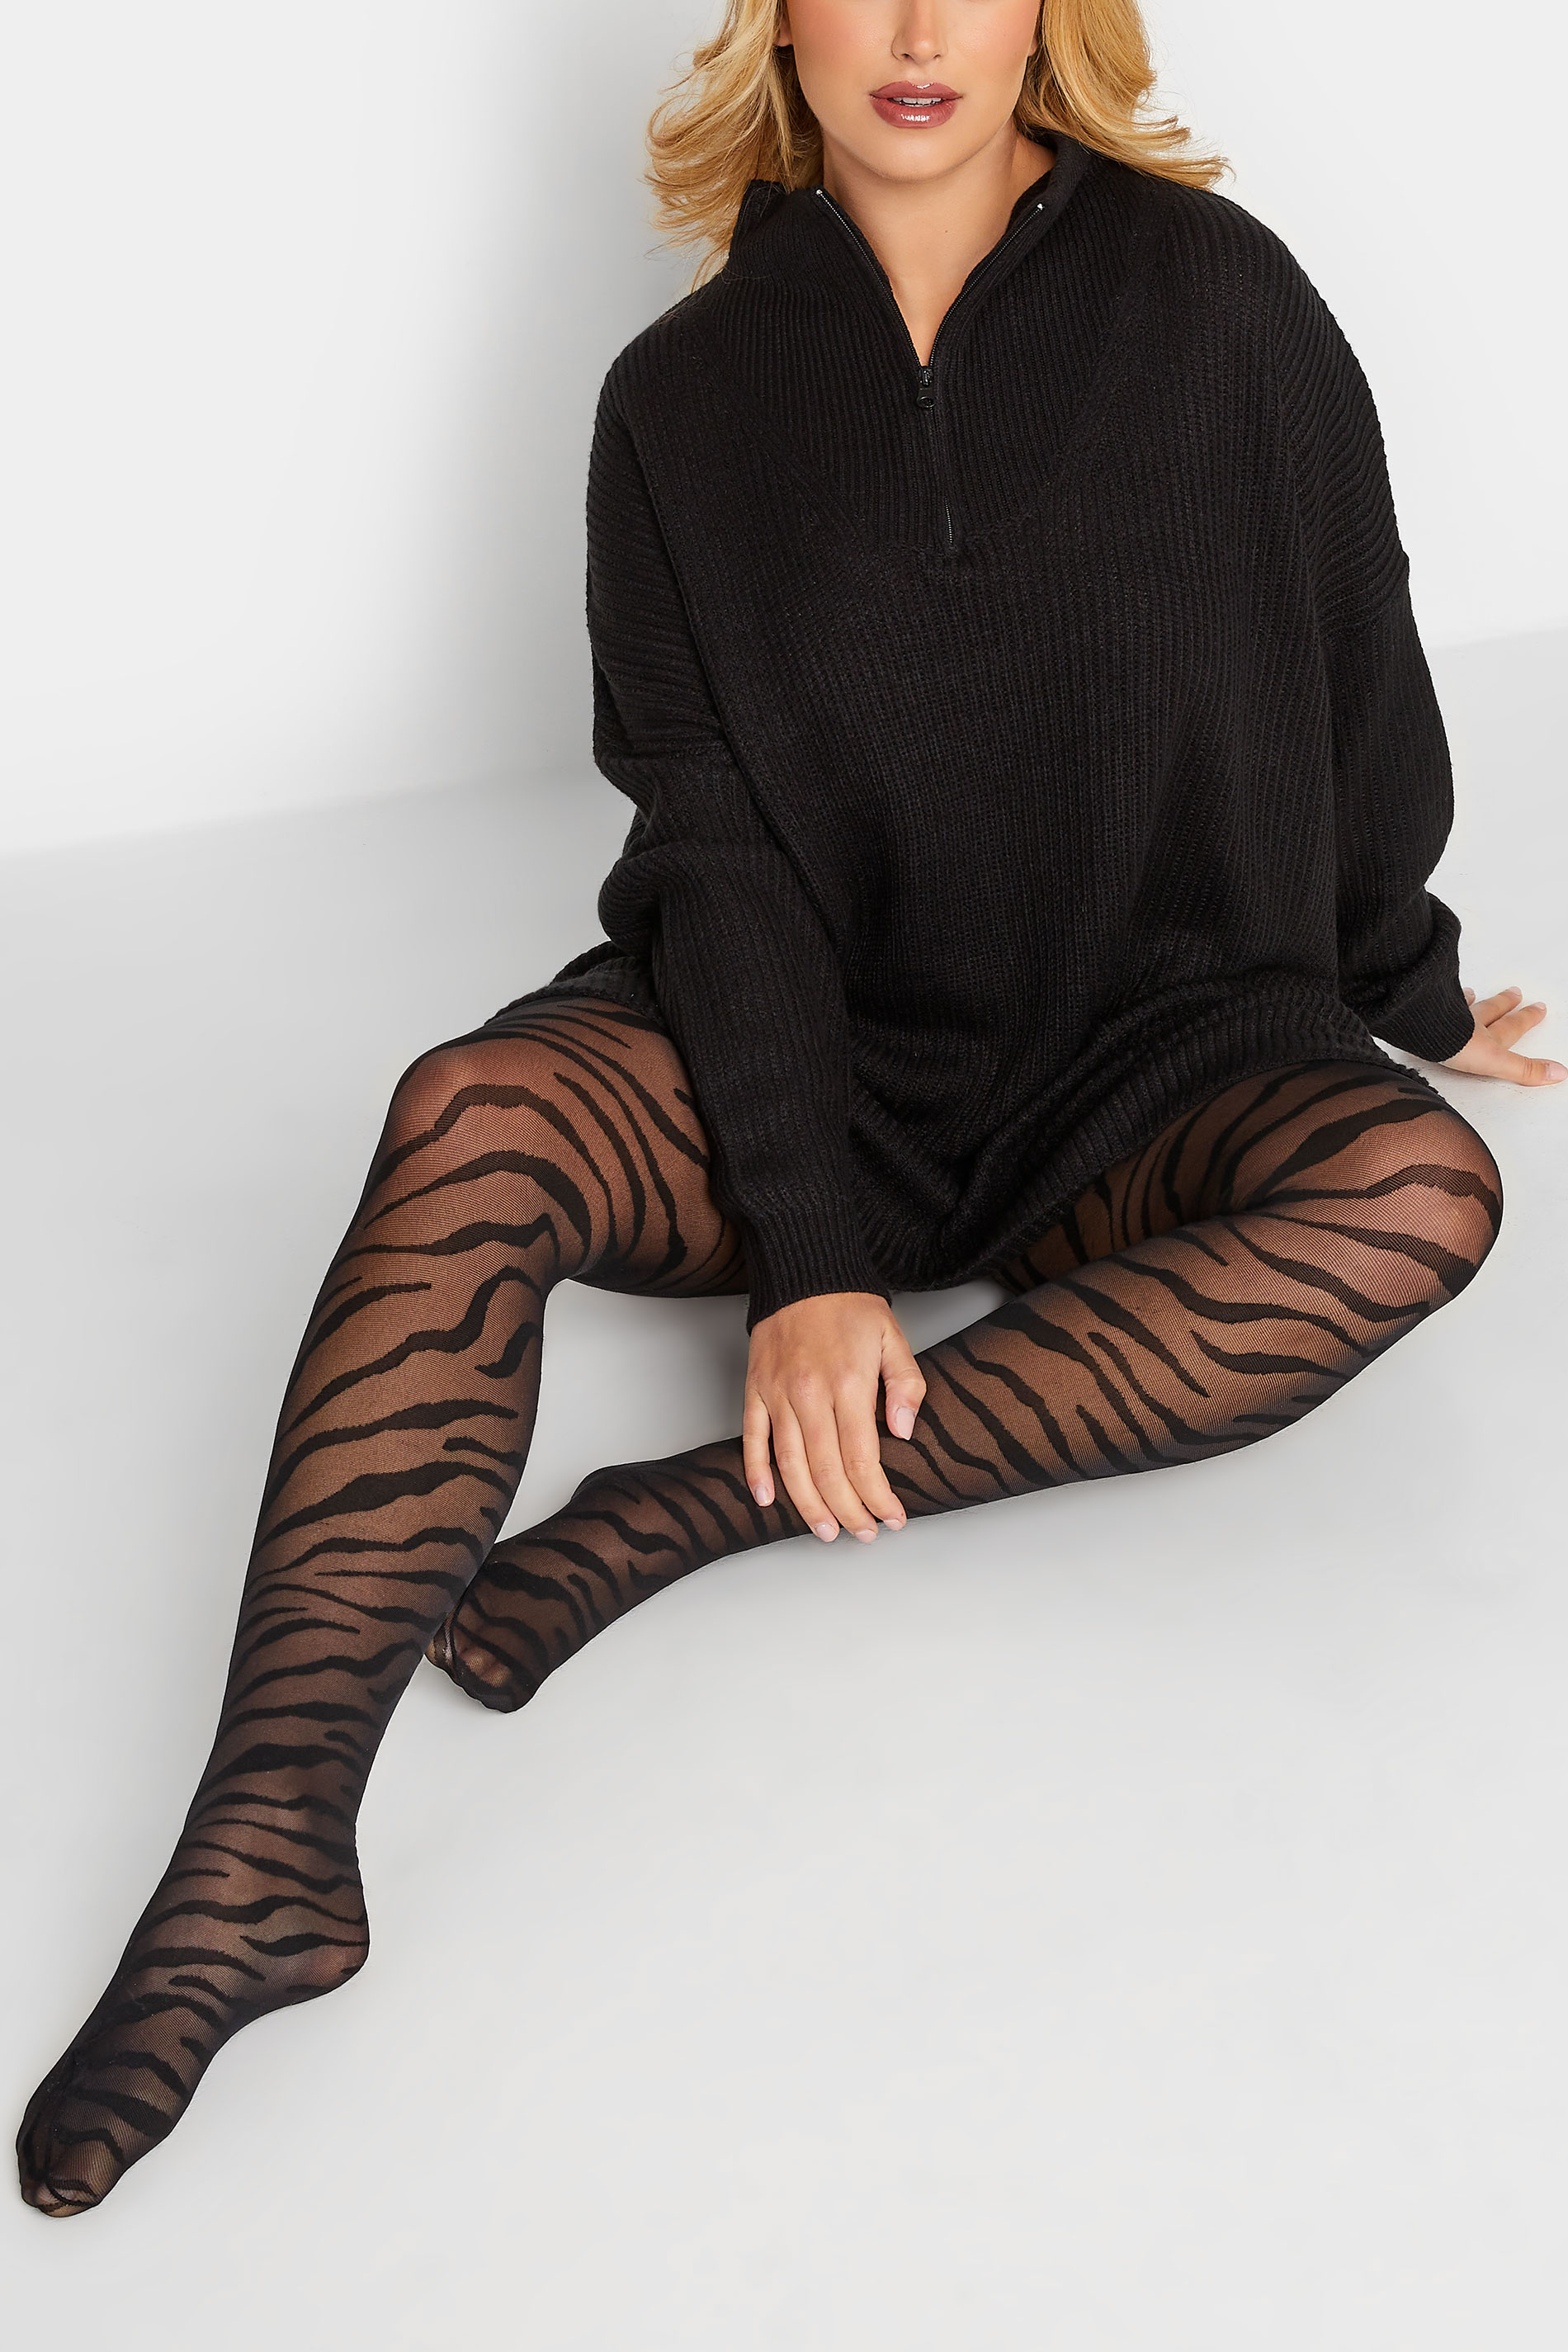 Plus Size Black Zebra Pattern Tights | Yours Clothing 1